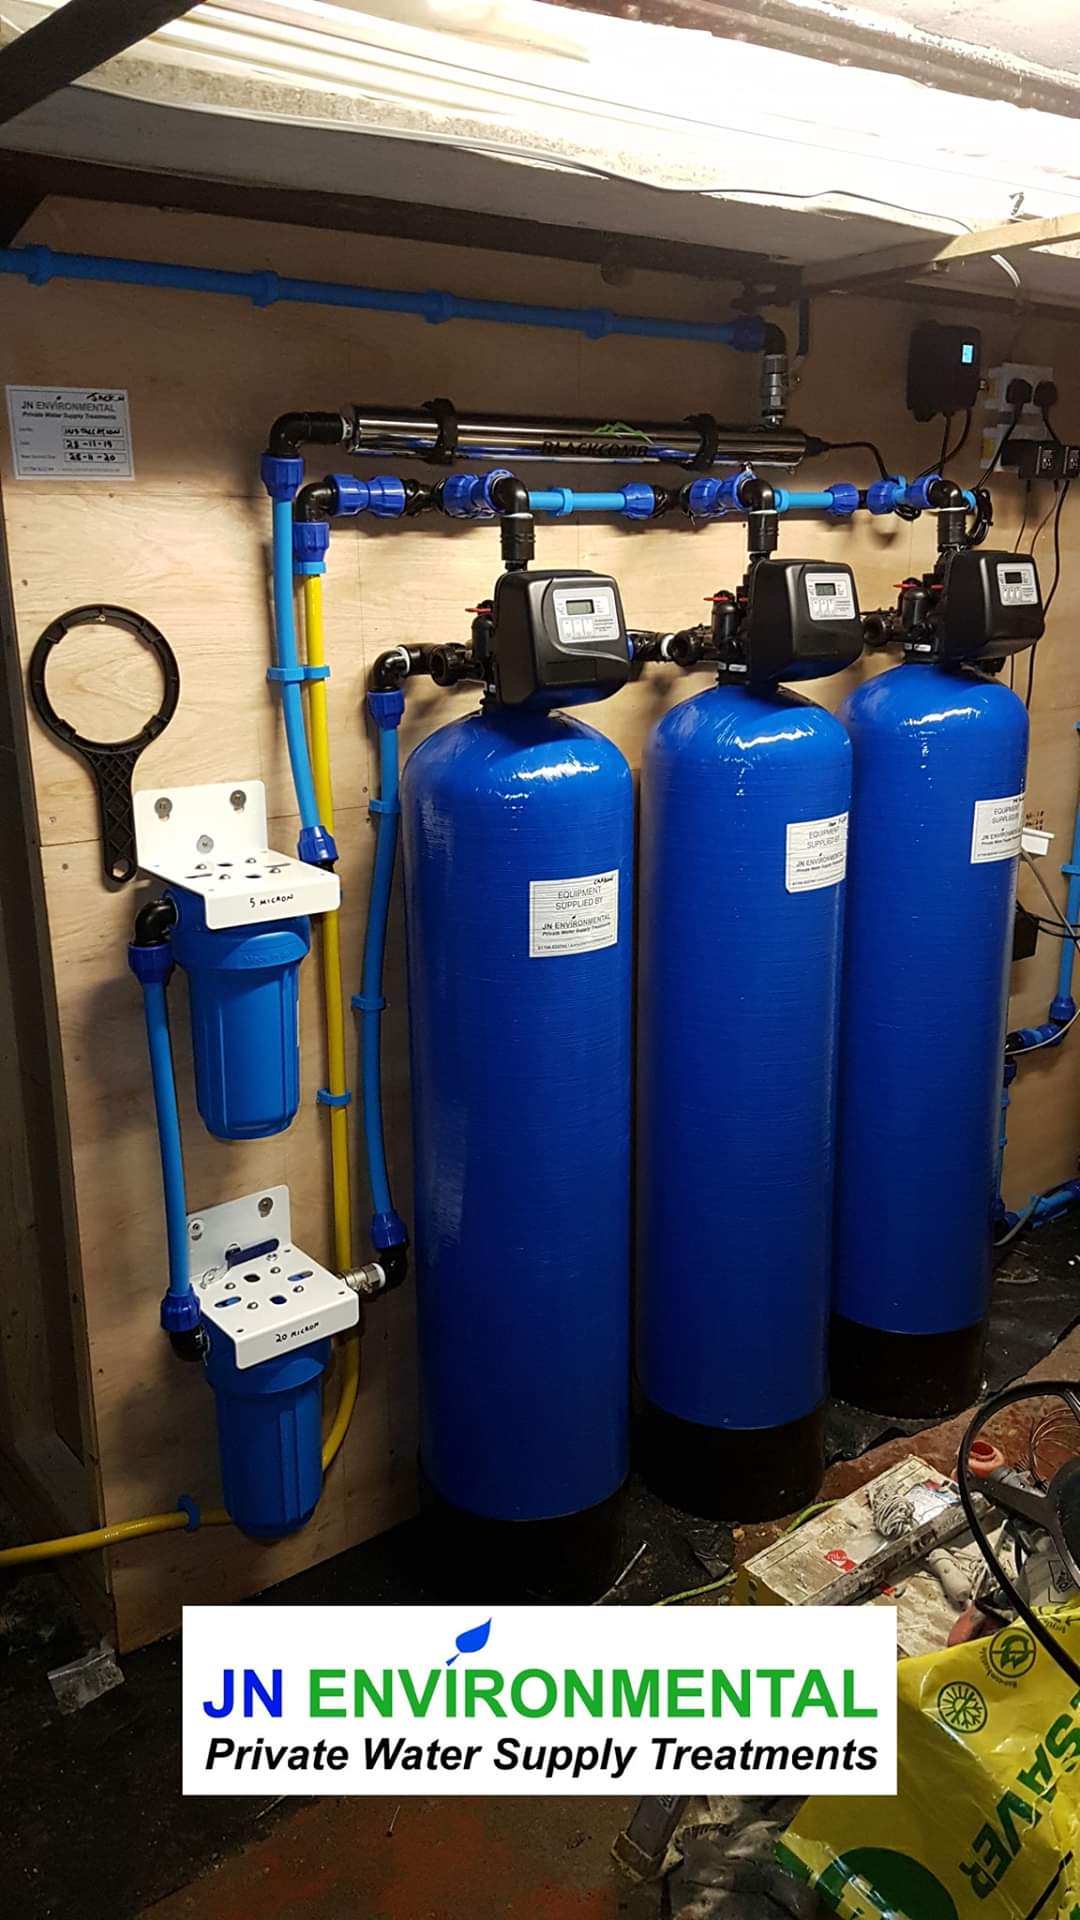 Borehole water treatment in Keighley, West Yorkshire